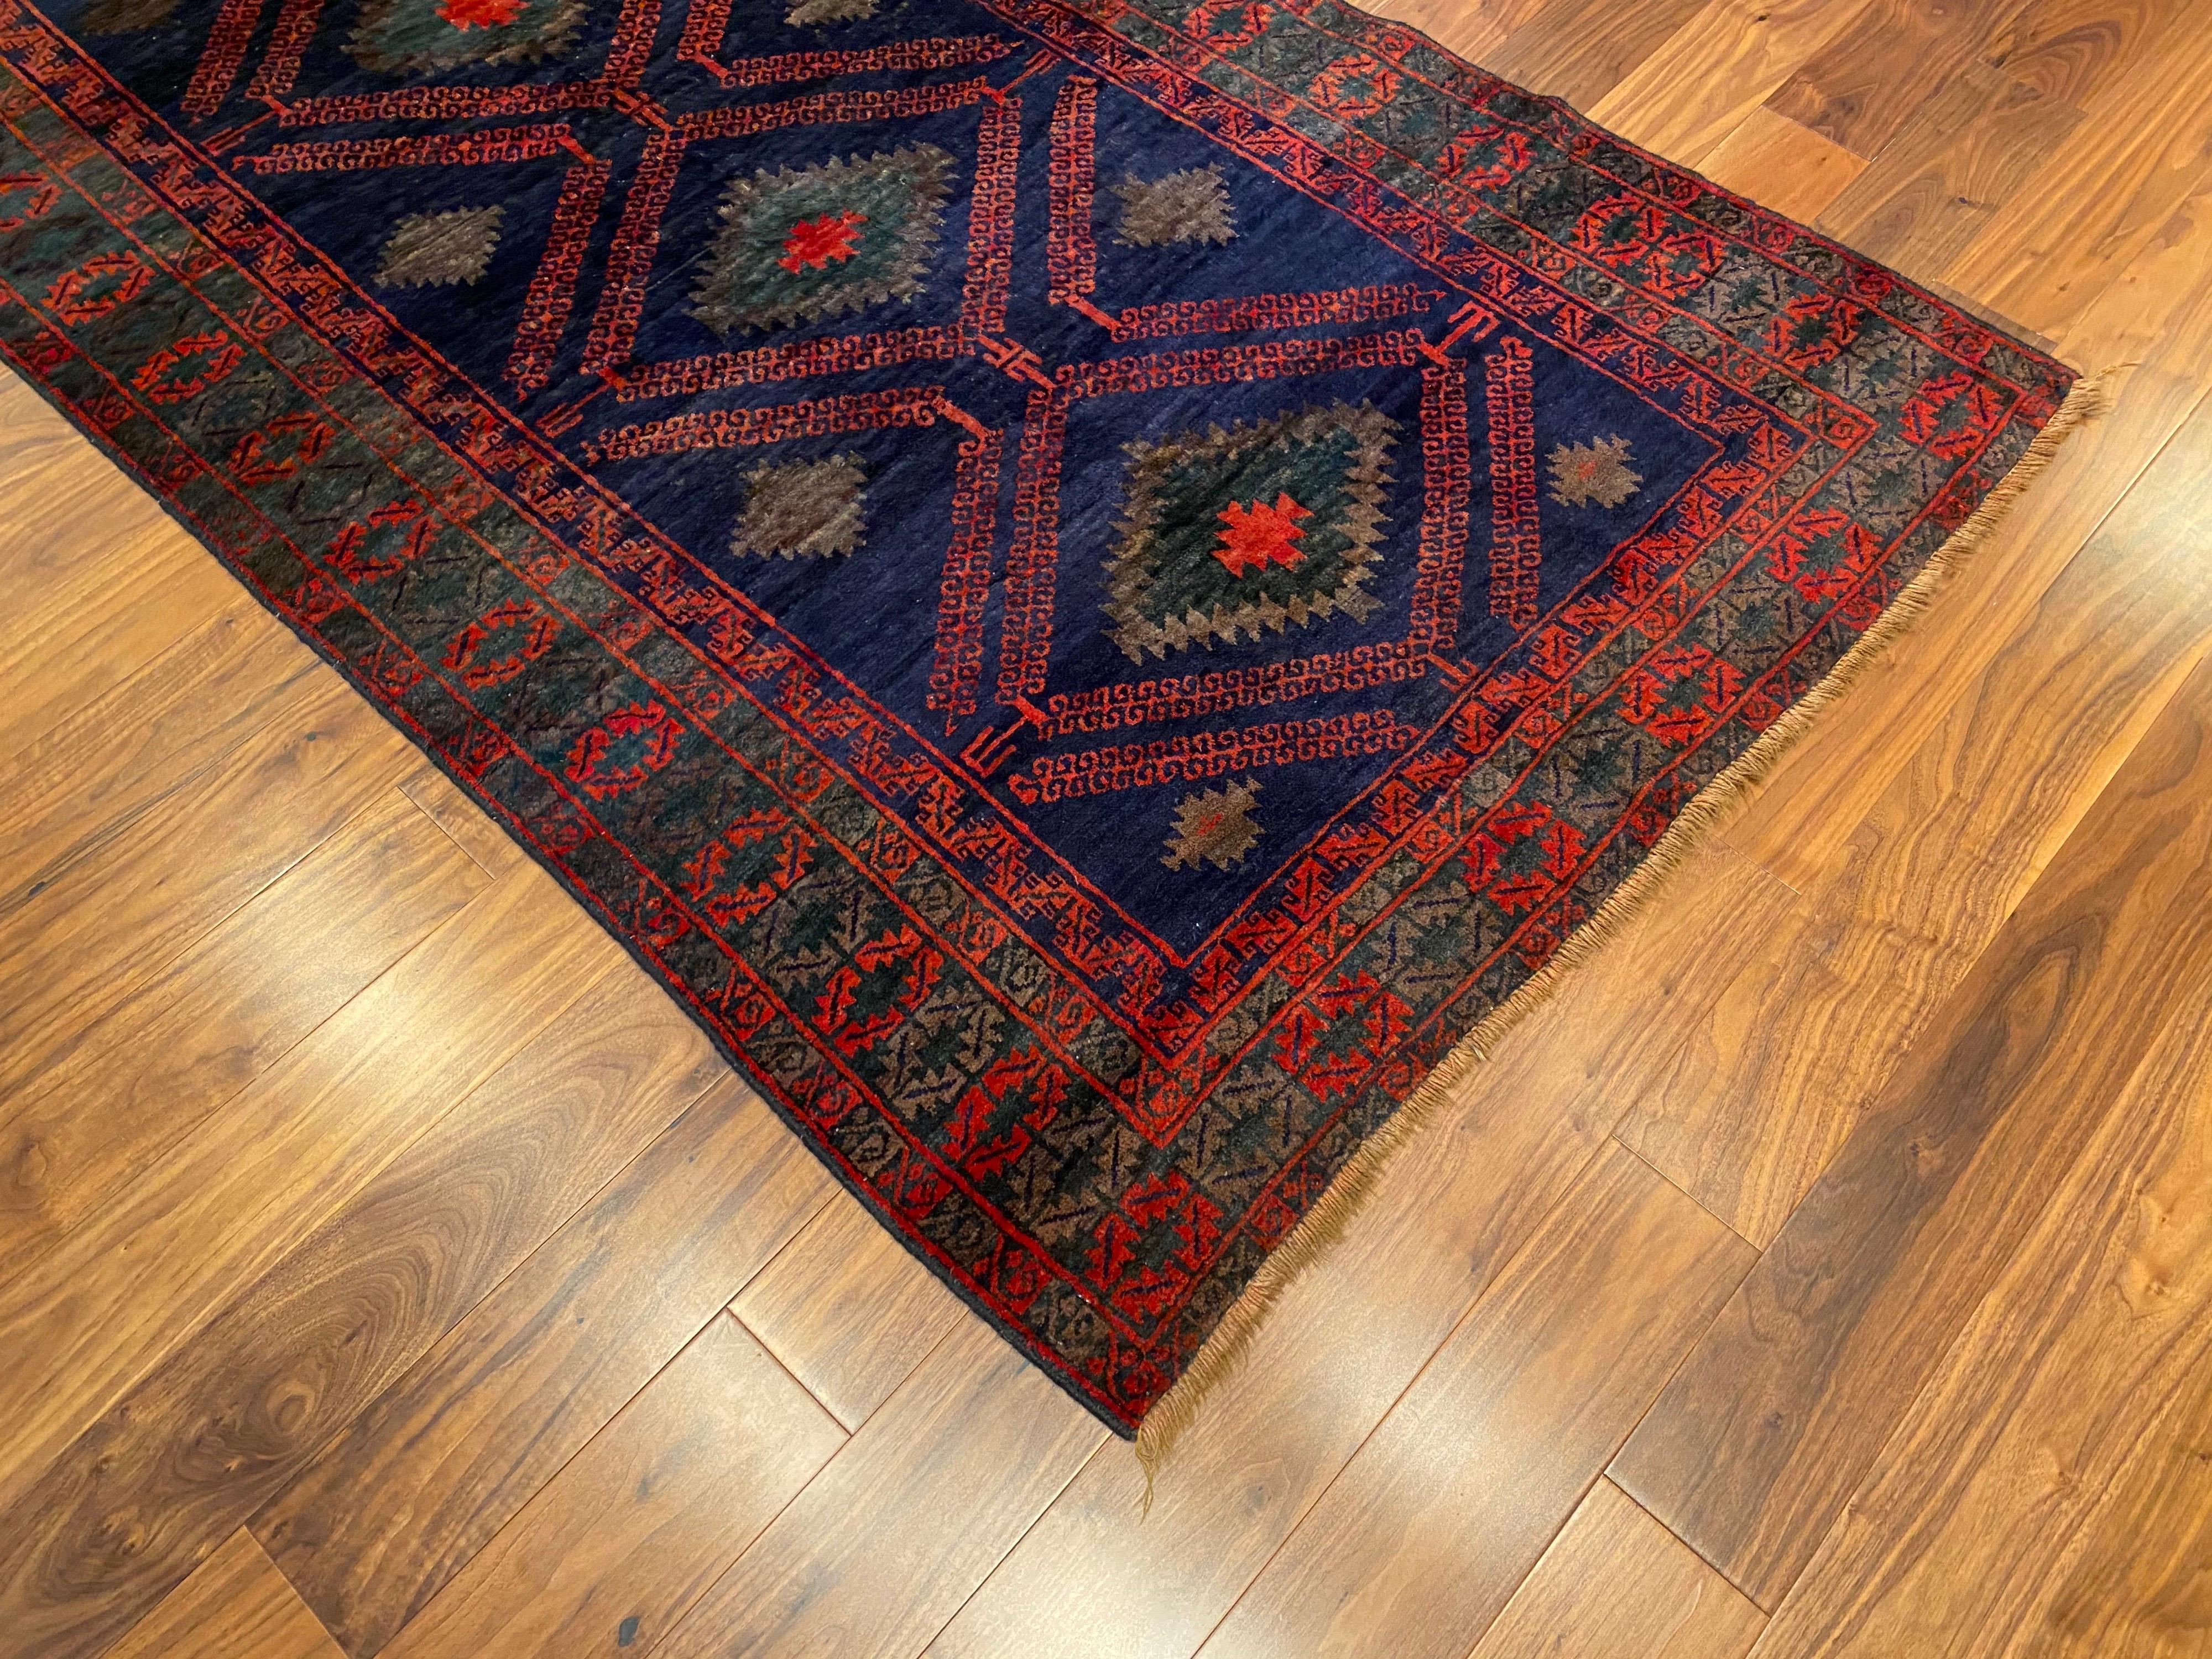 Antique Turkish wool rug with primary. Colors of dark navy and burnt orange. Great color and size.